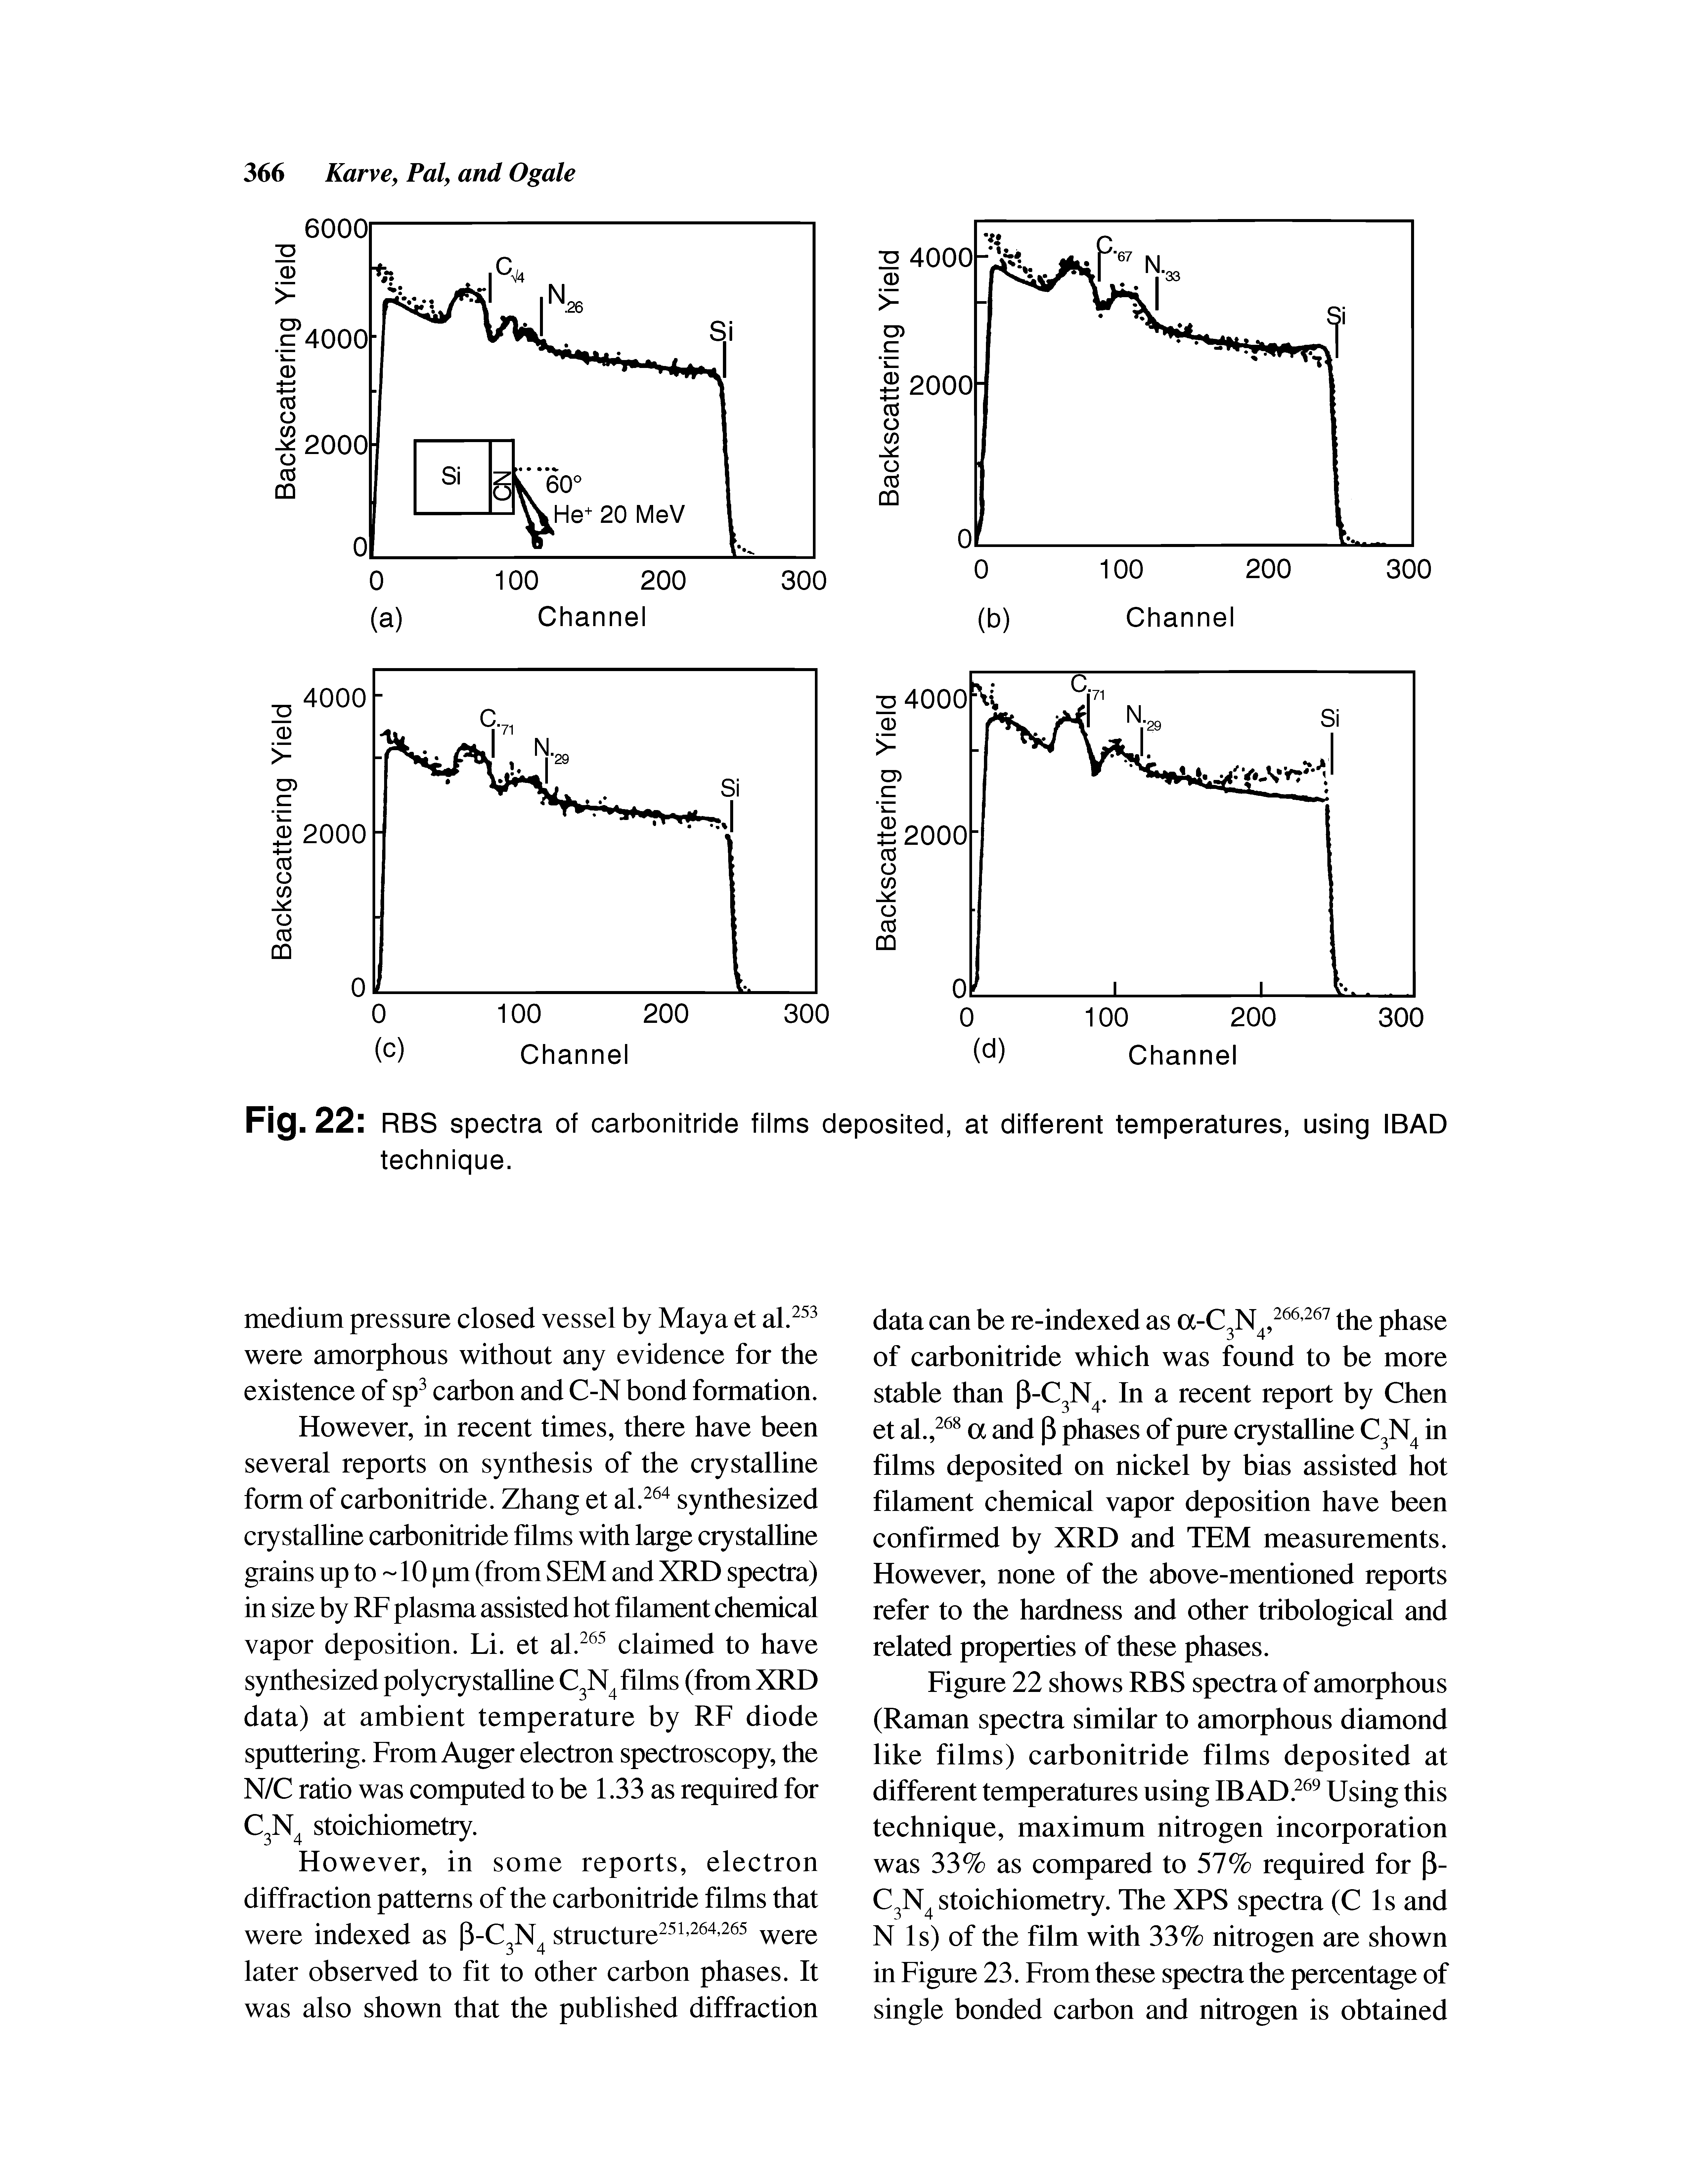 Figure 22 shows RBS spectra of amorphous (Raman spectra similar to amorphous diamond like films) carbonitride films deposited at different temperatures using IBAD. Using this technique, maximum nitrogen incorporation was 33% as compared to 57% required for P-C3N4 stoichiometry. The XPS spectra (C Is and N Is) of the film with 33% nitrogen are shown in Figure 23. From these spectra the percentage of single bonded carbon and nitrogen is obtained...